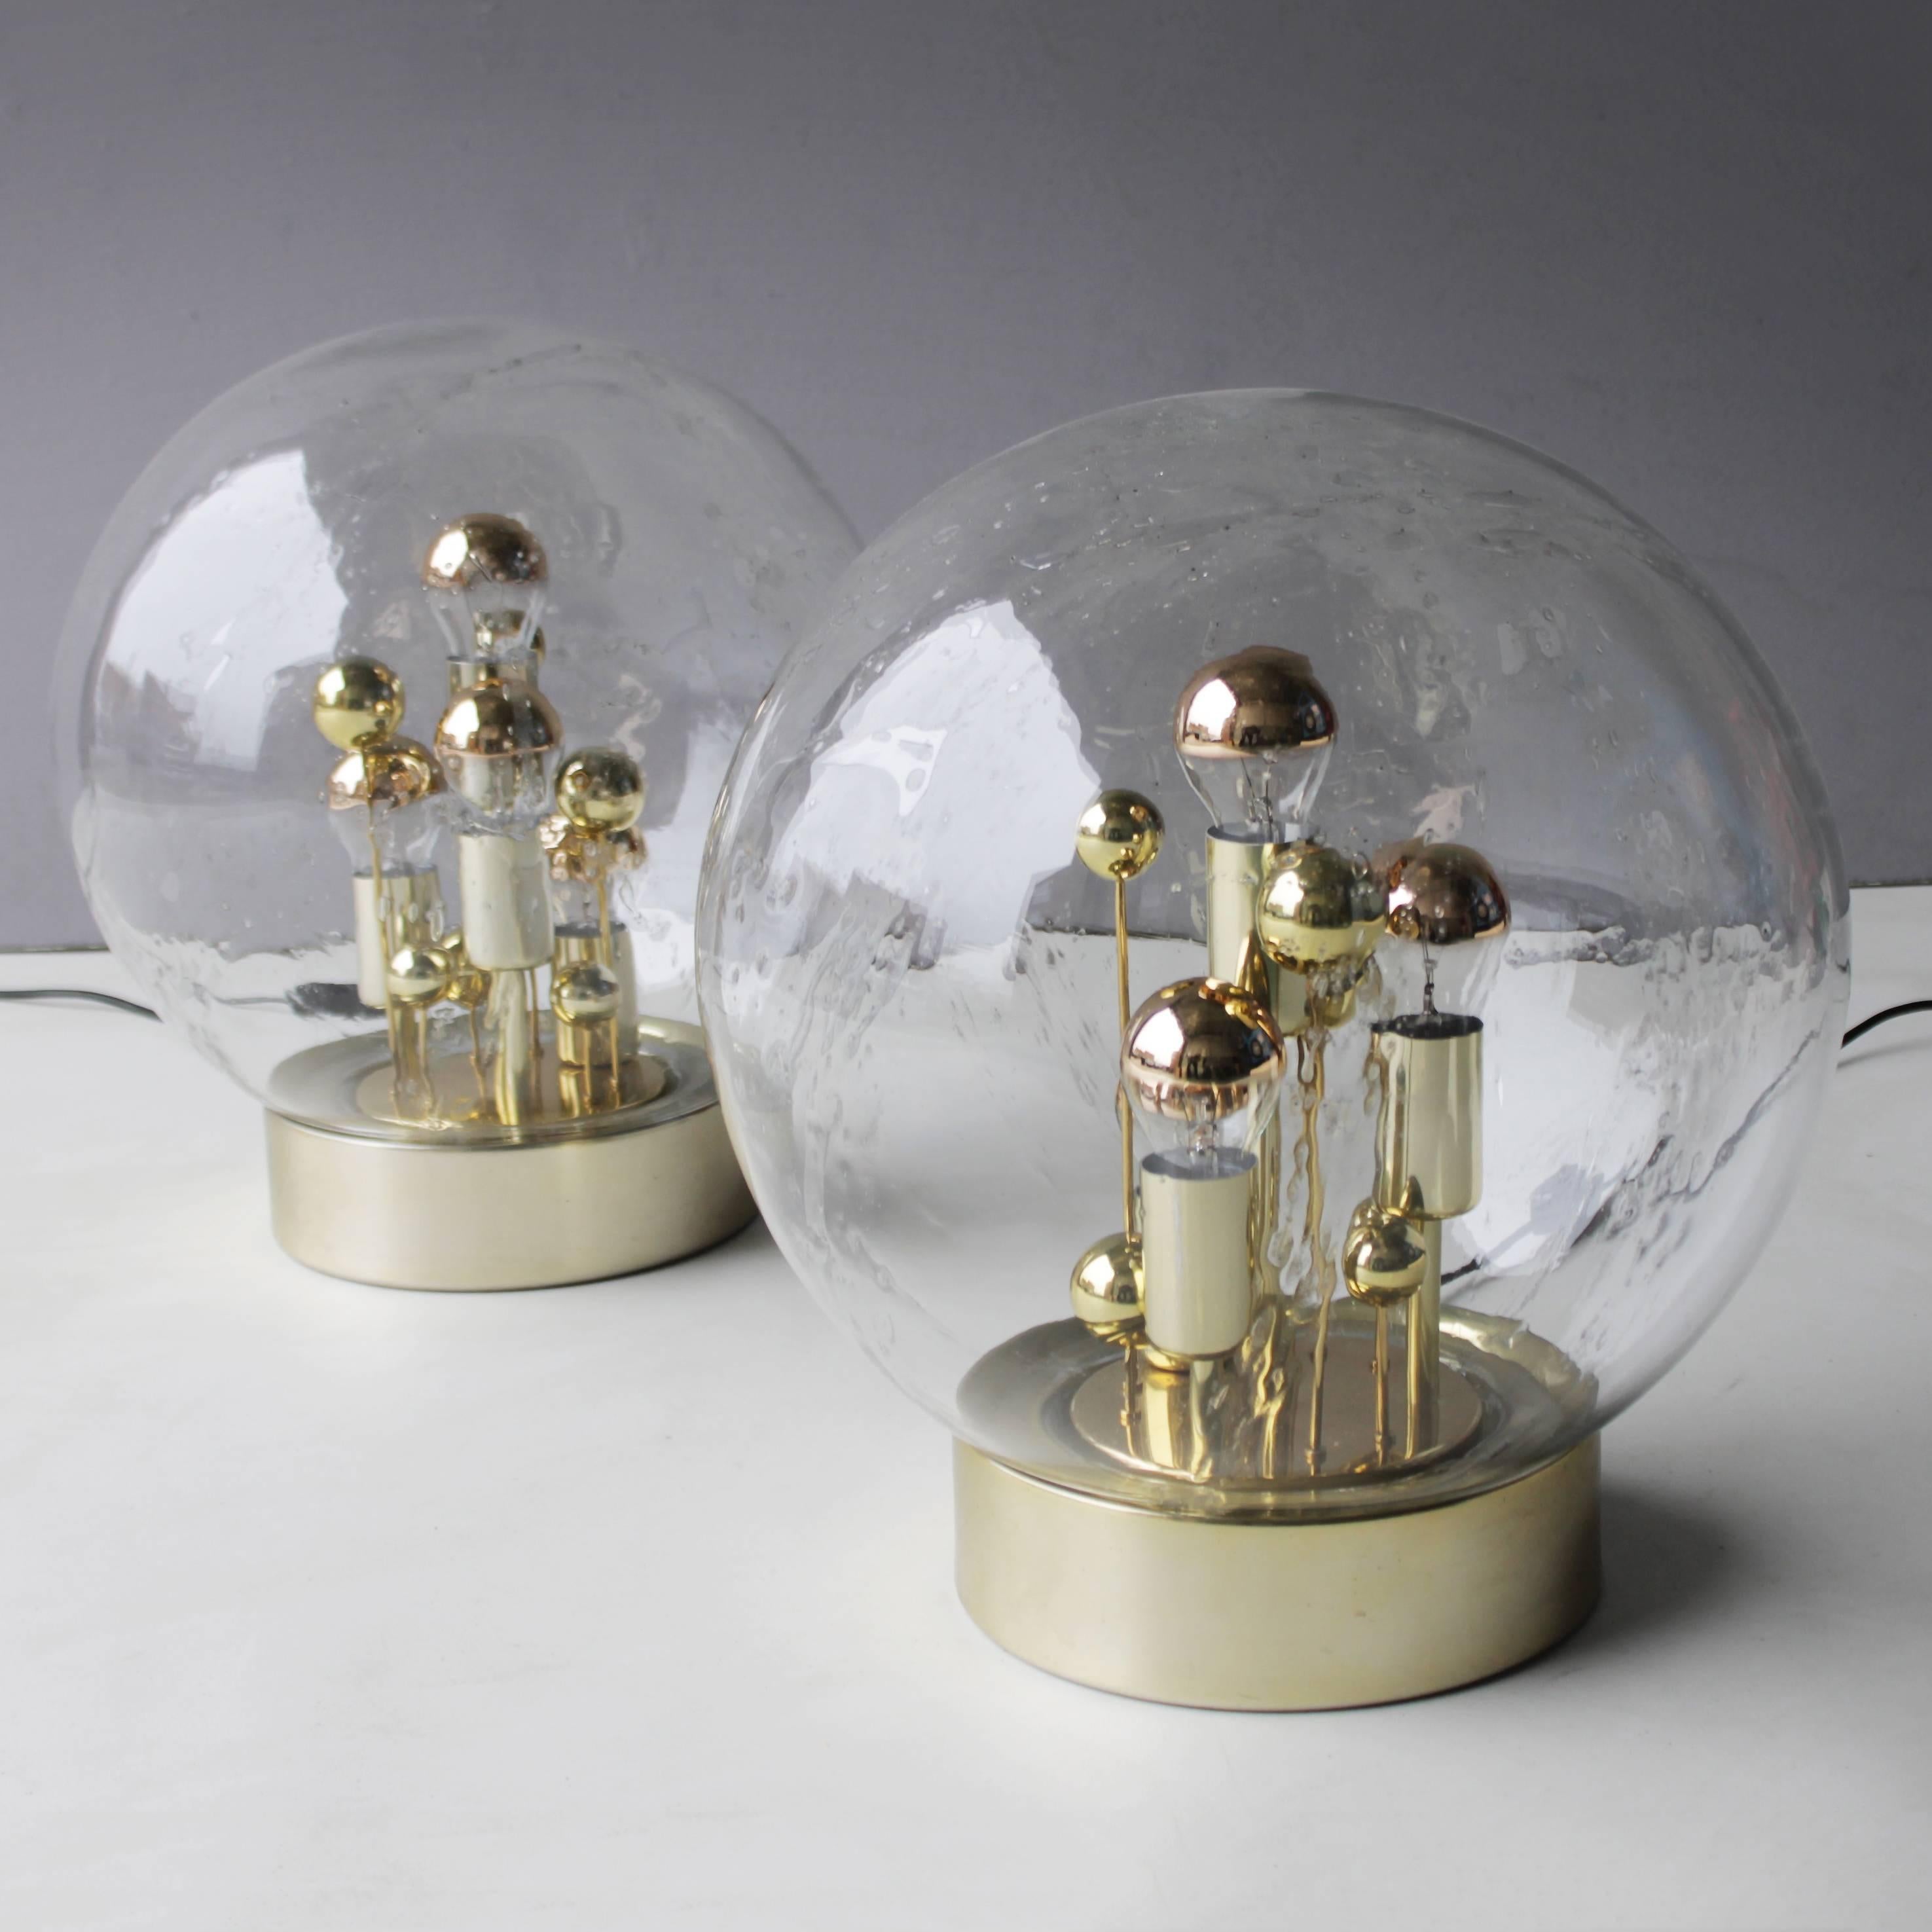 Two (2) Doria gold globe table or floor lights. Design by Walter Donner for Doria Leuchten Germany. Four reflector bulbs. Excellent condition. Marked.